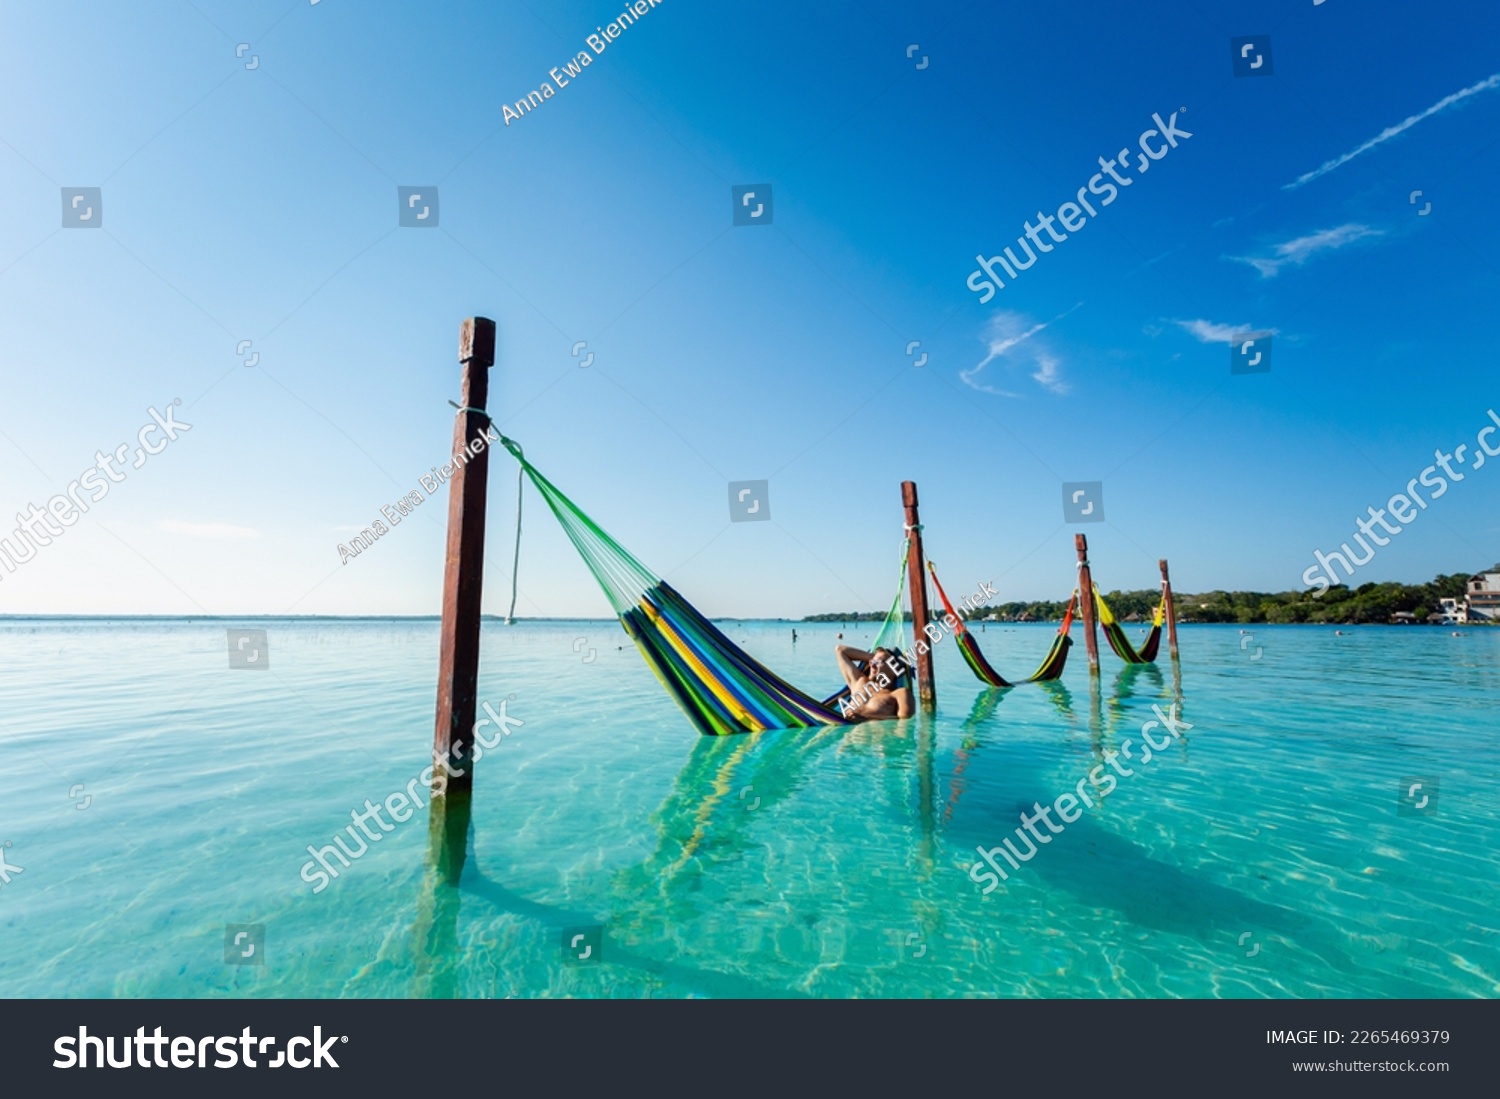 Handsome male tourist relaxing in a hammock in Laguna Bacalar in Mexico during kayak trip. #2265469379